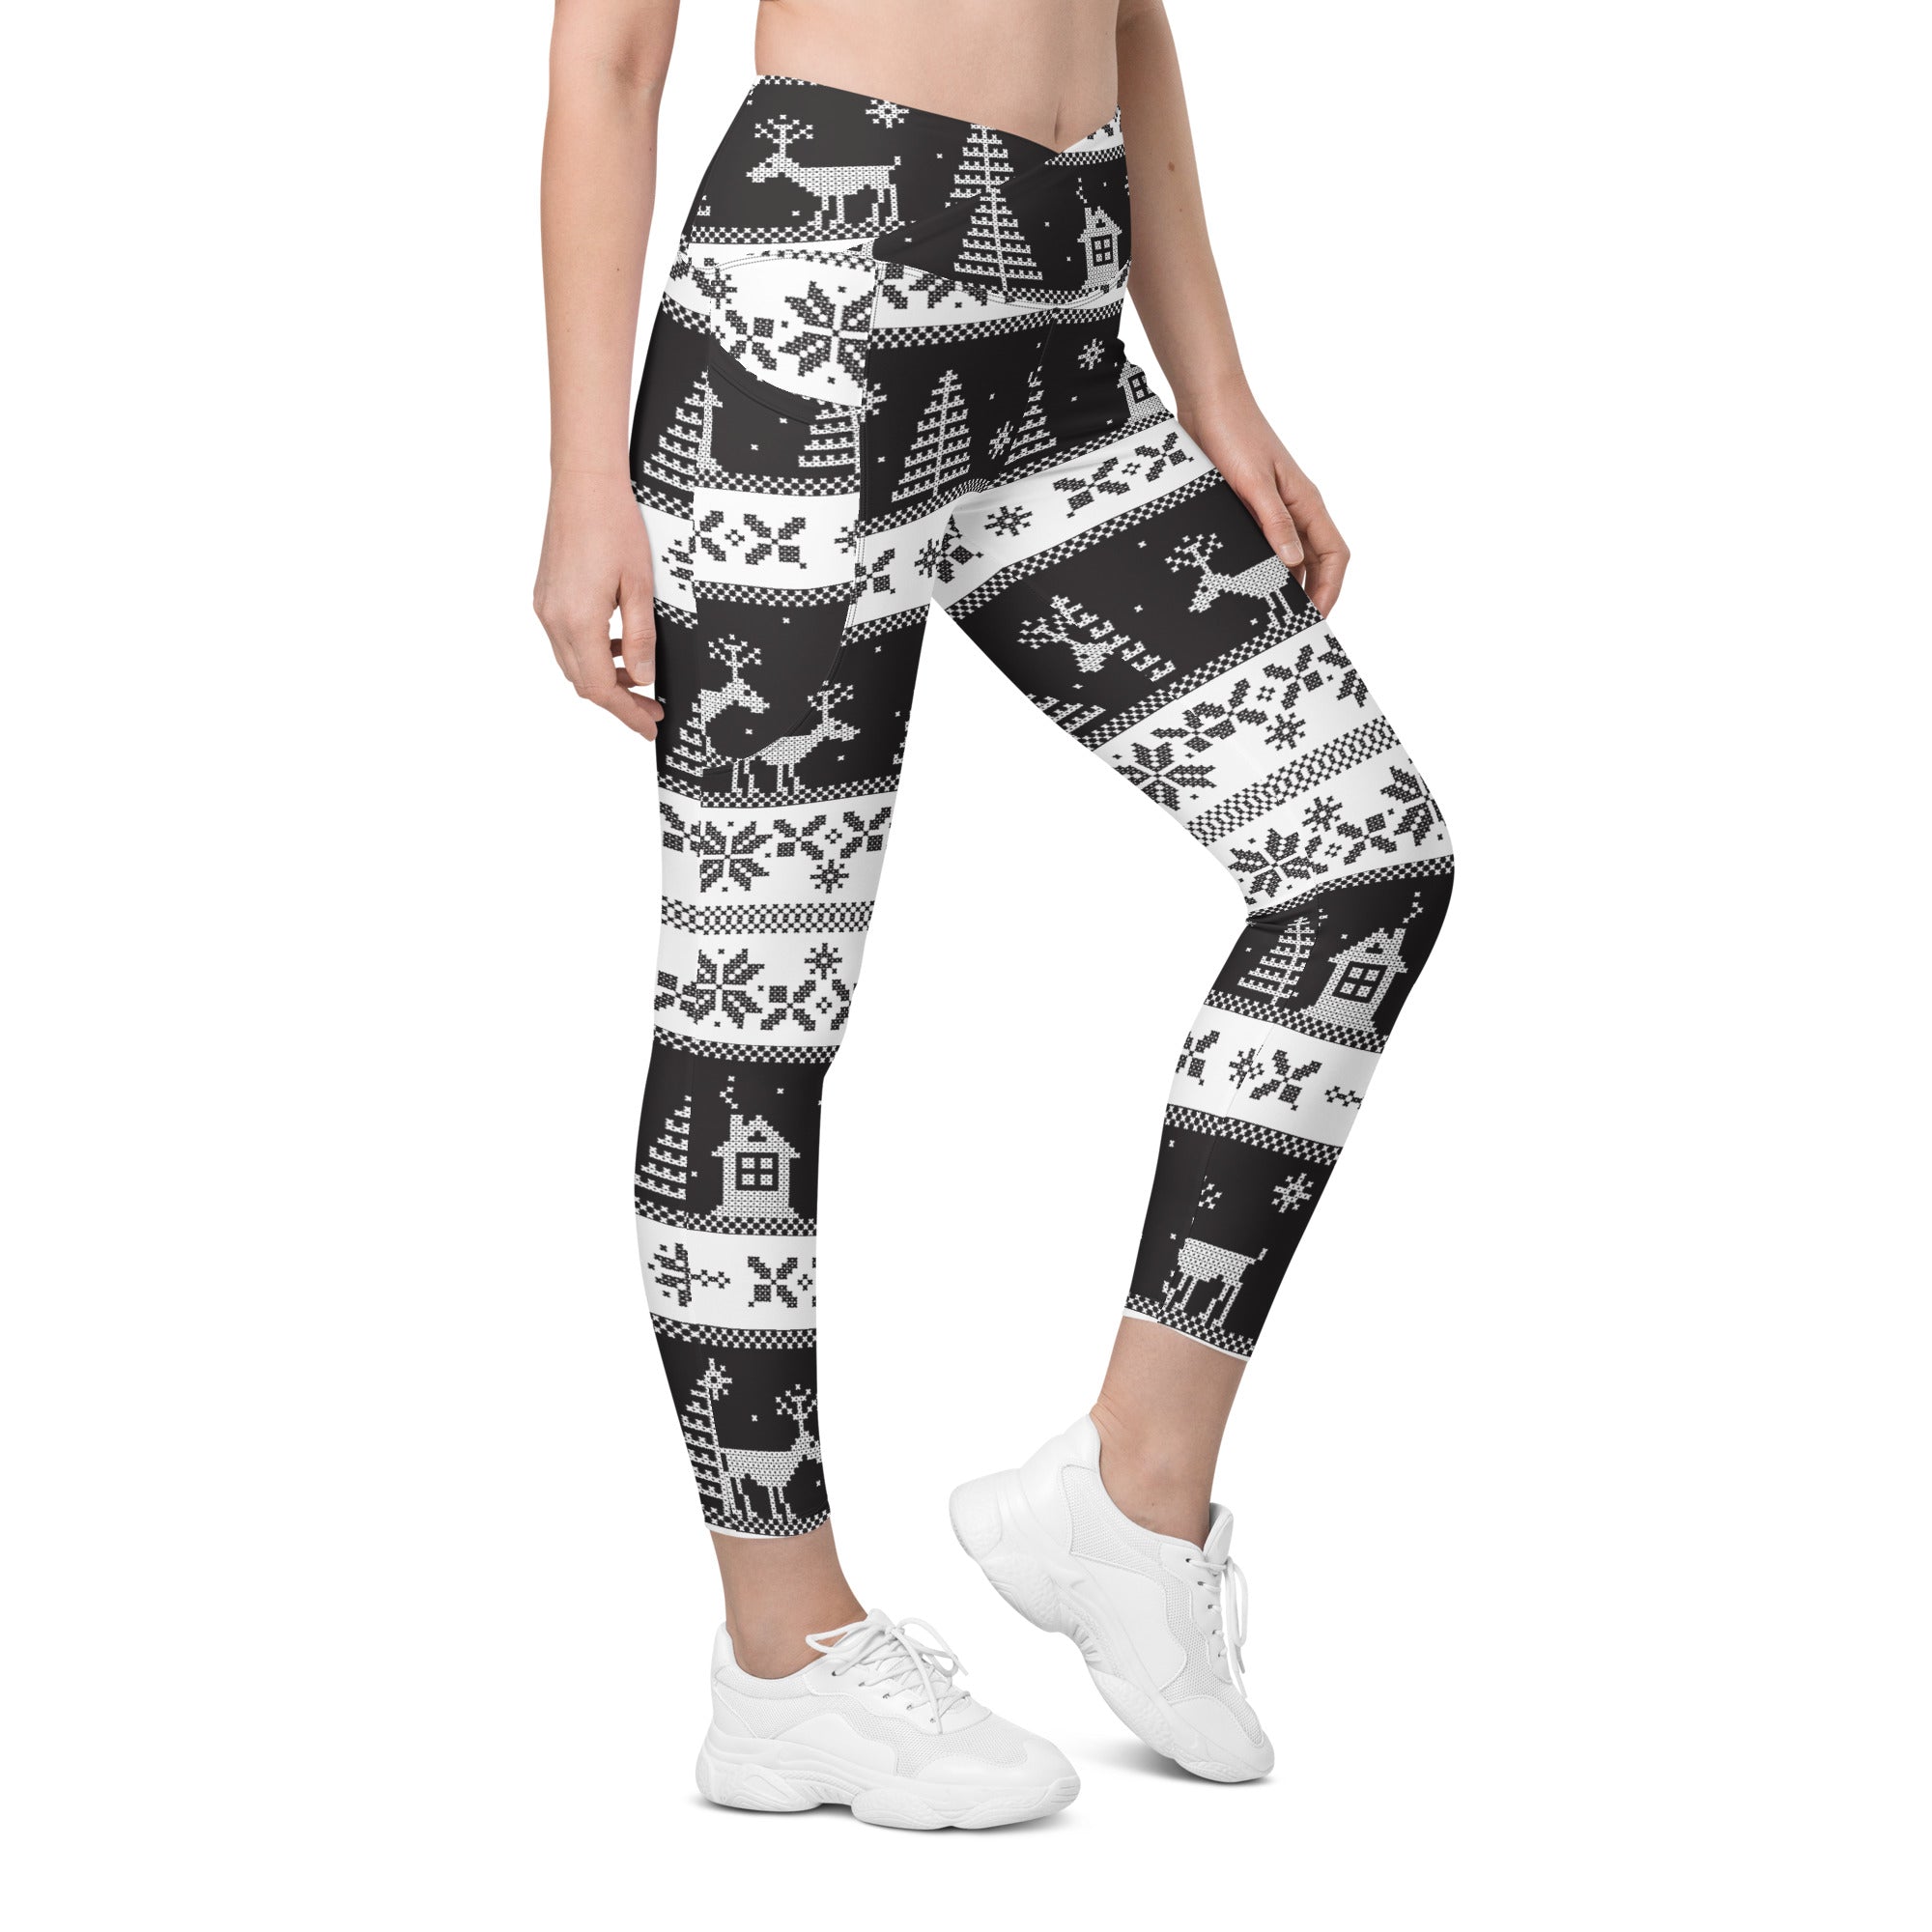 Vintage Black & White Christmas Crossover Leggings With Pockets